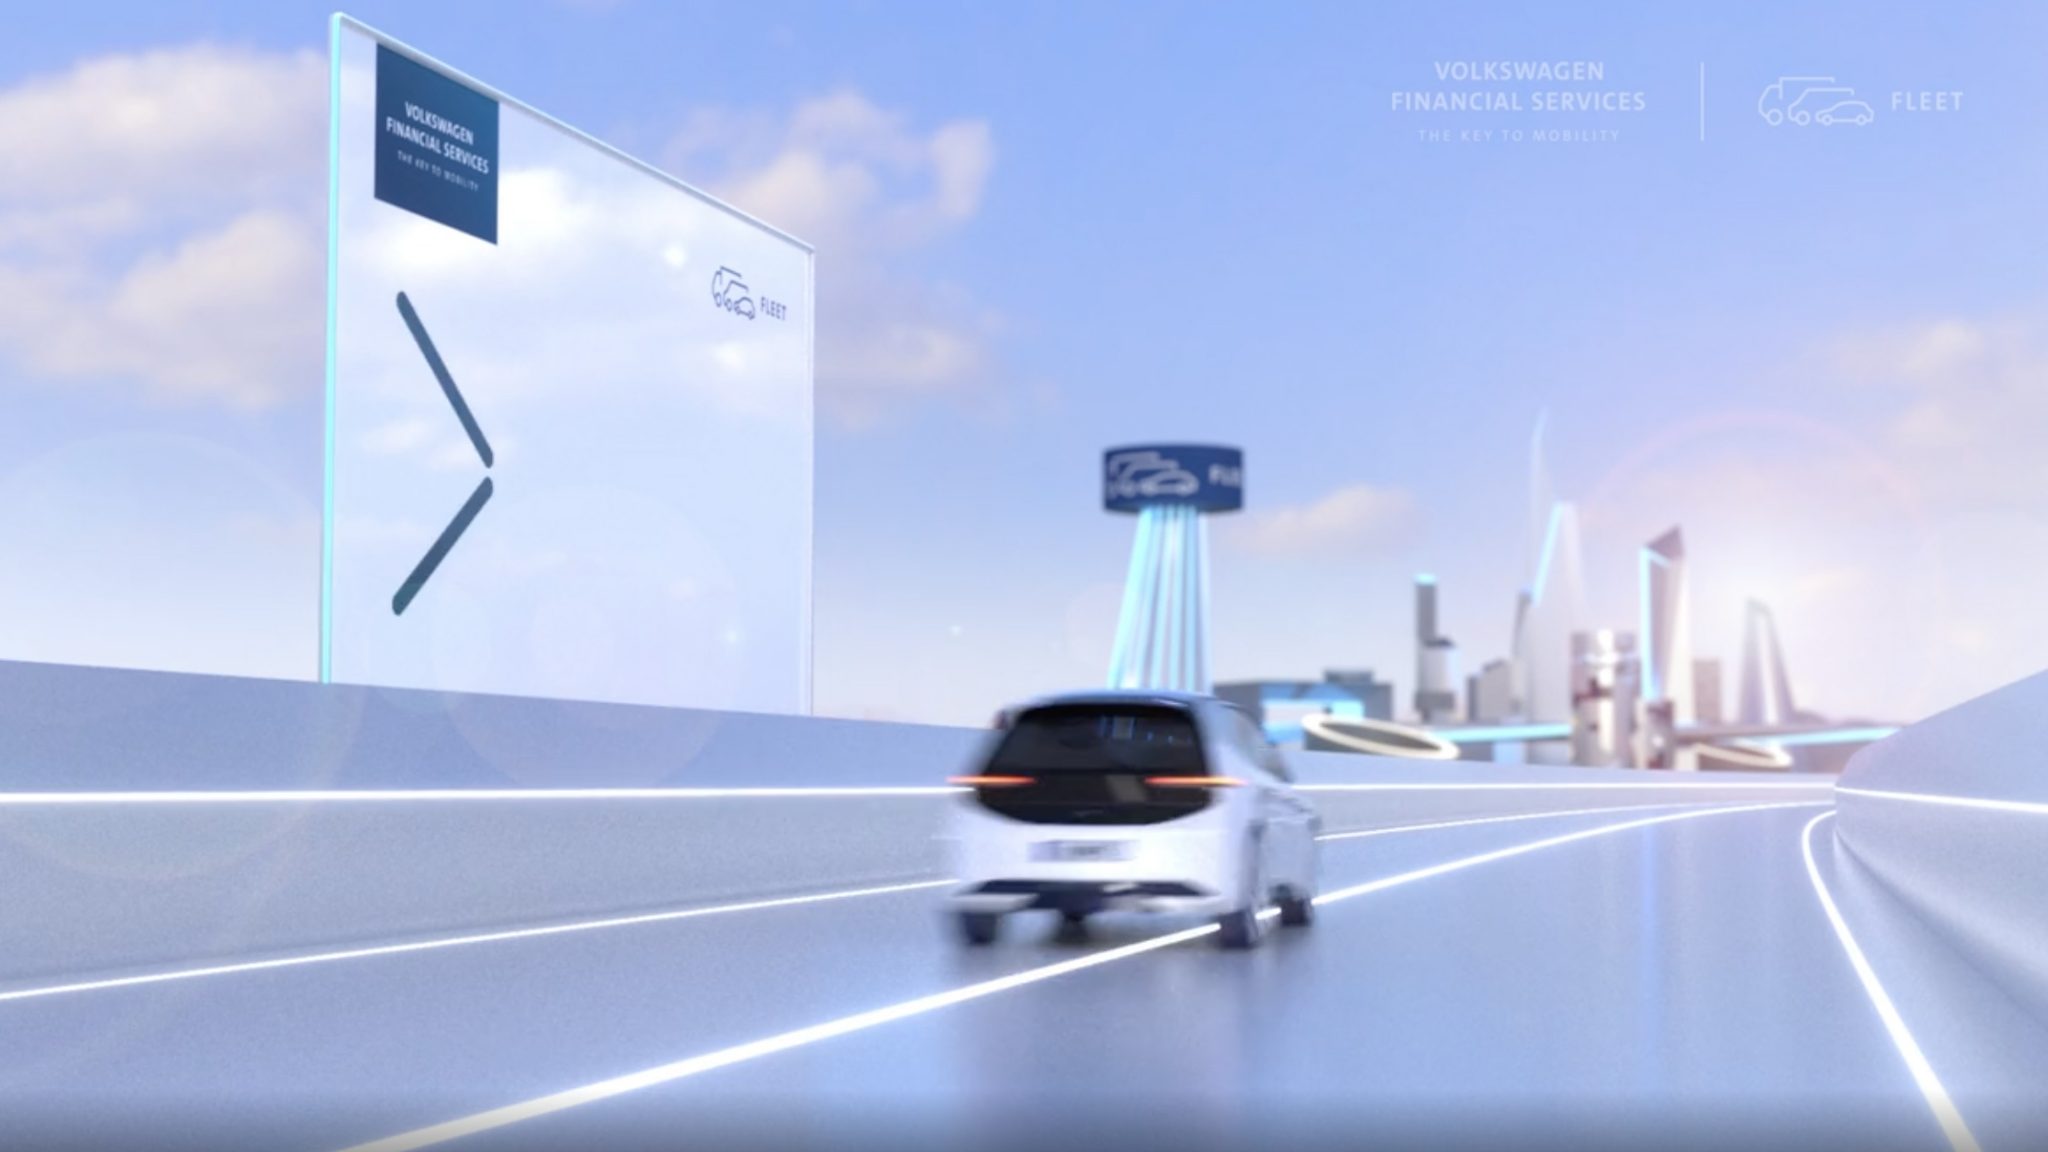 360 virtual animations showing concept car travelling through futuristic city